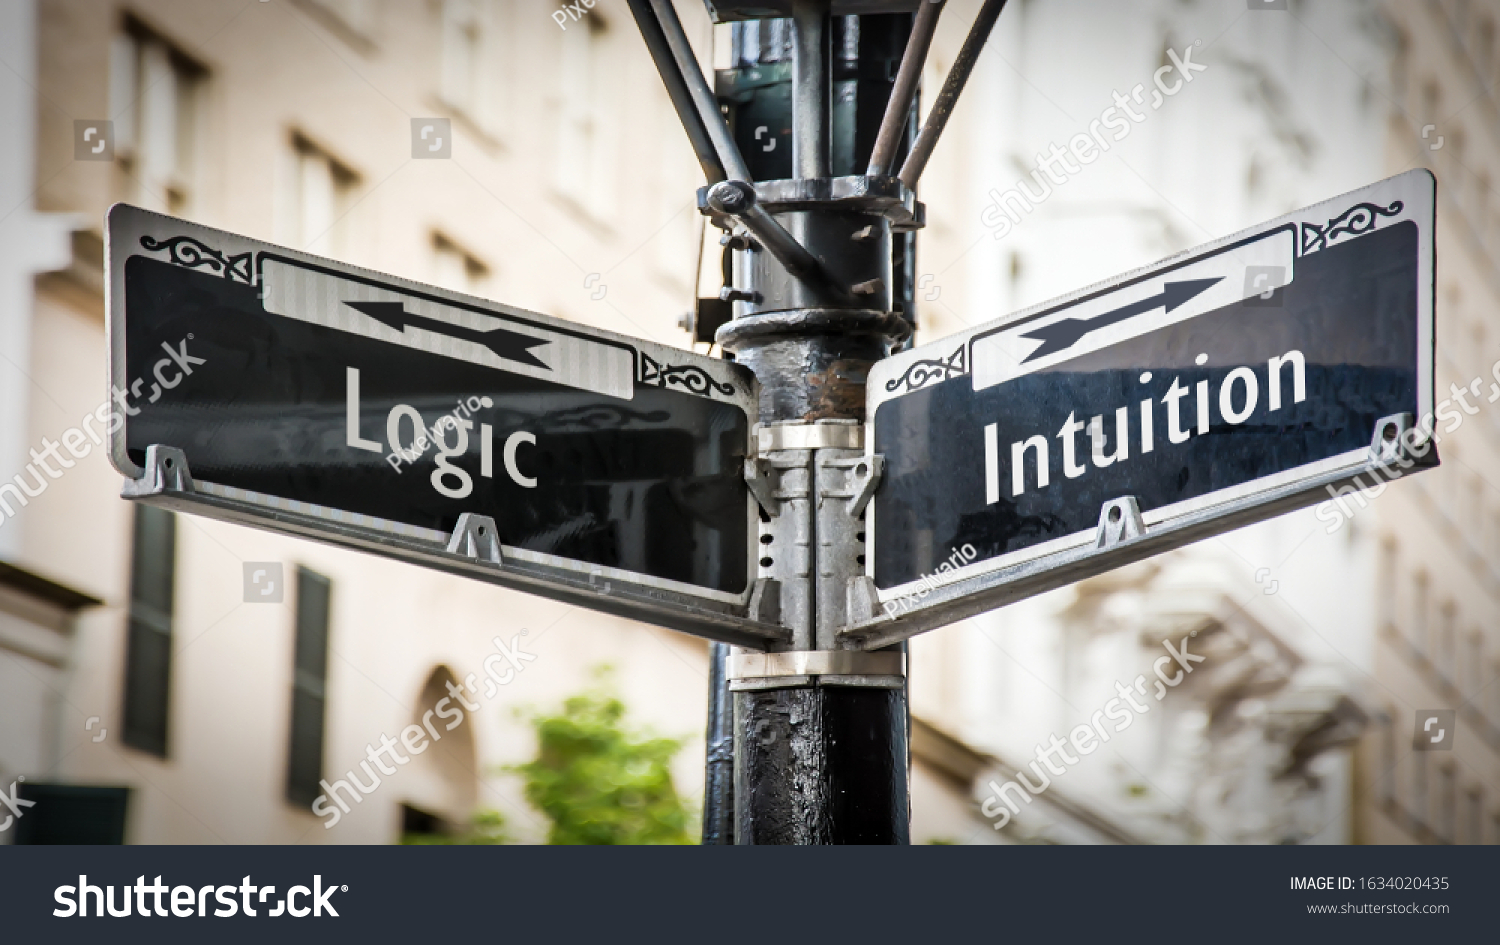 Street Sign the Direction Way to Intuition versus Logic #1634020435